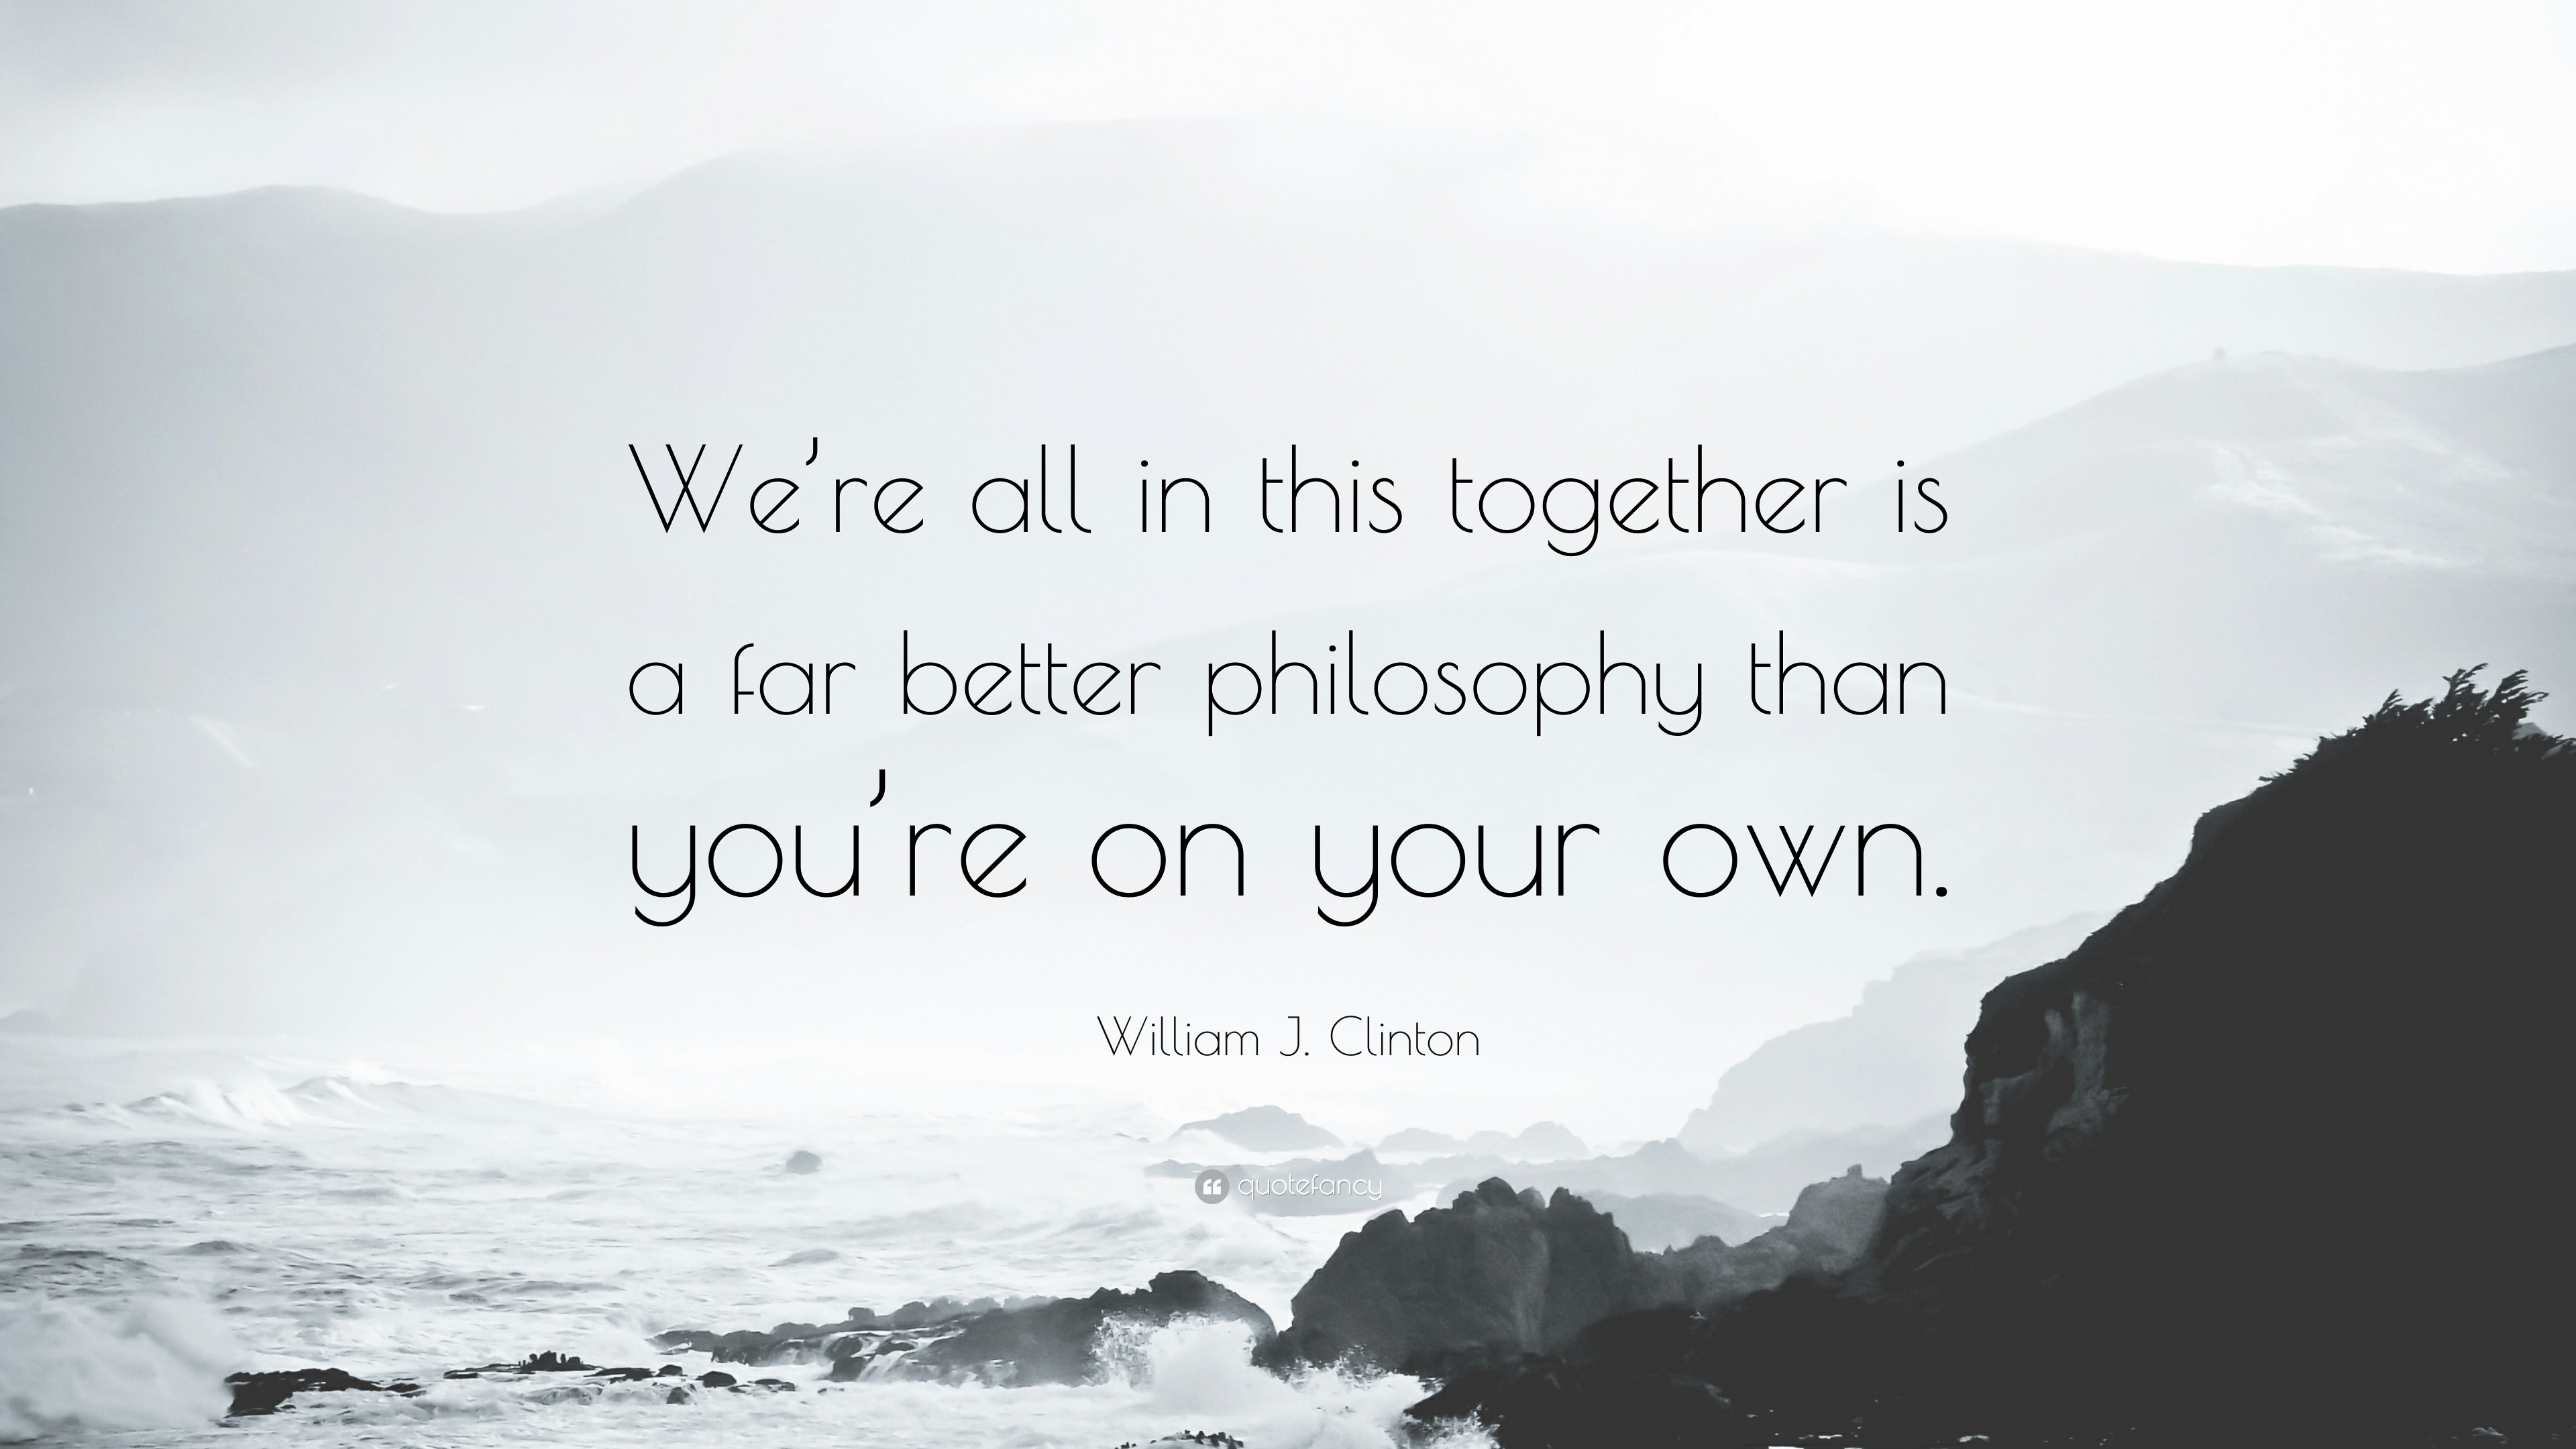 William J. Clinton Quote: “We're All In This Together Is A Far Better Philosophy Than